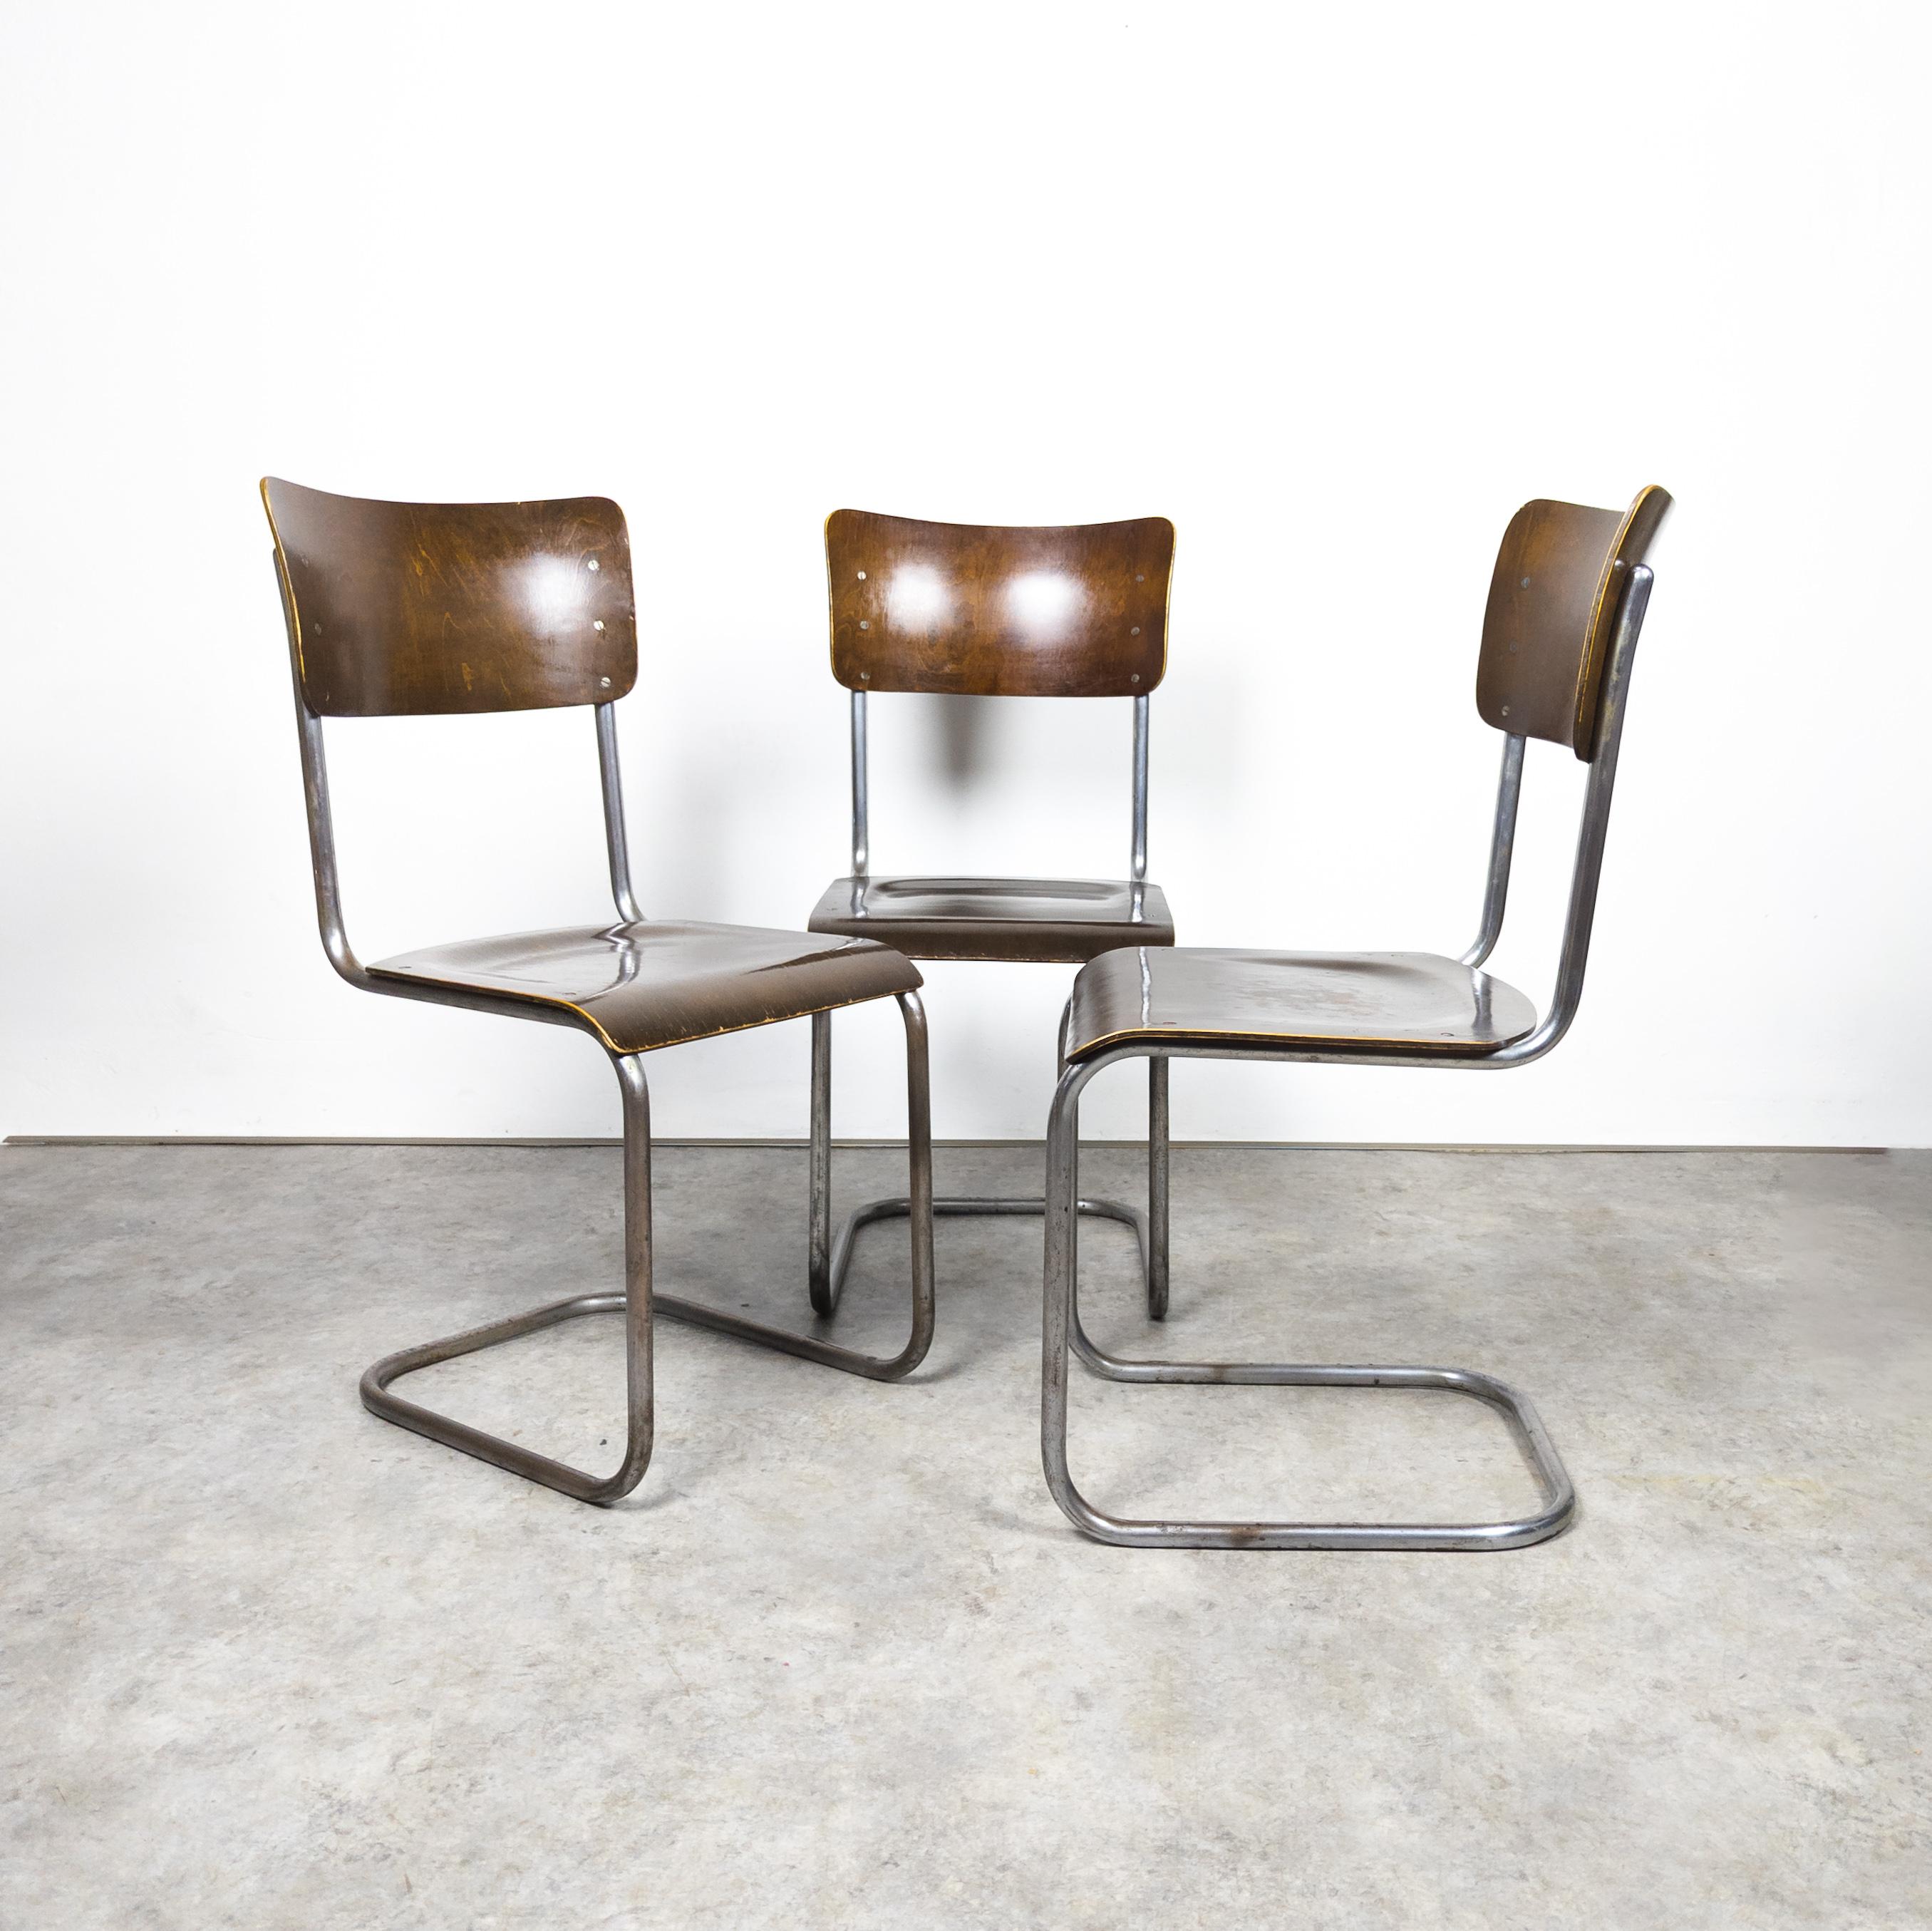 Rare early chairs manufactured by Vichr & co. , former Czechoslovakia in the 1930s. Set of three Bauhaus cantilever chairs with a sturdy tubular steel frame, showcasing vintage charm. The steel elements exhibit distinct signs of aging, while the